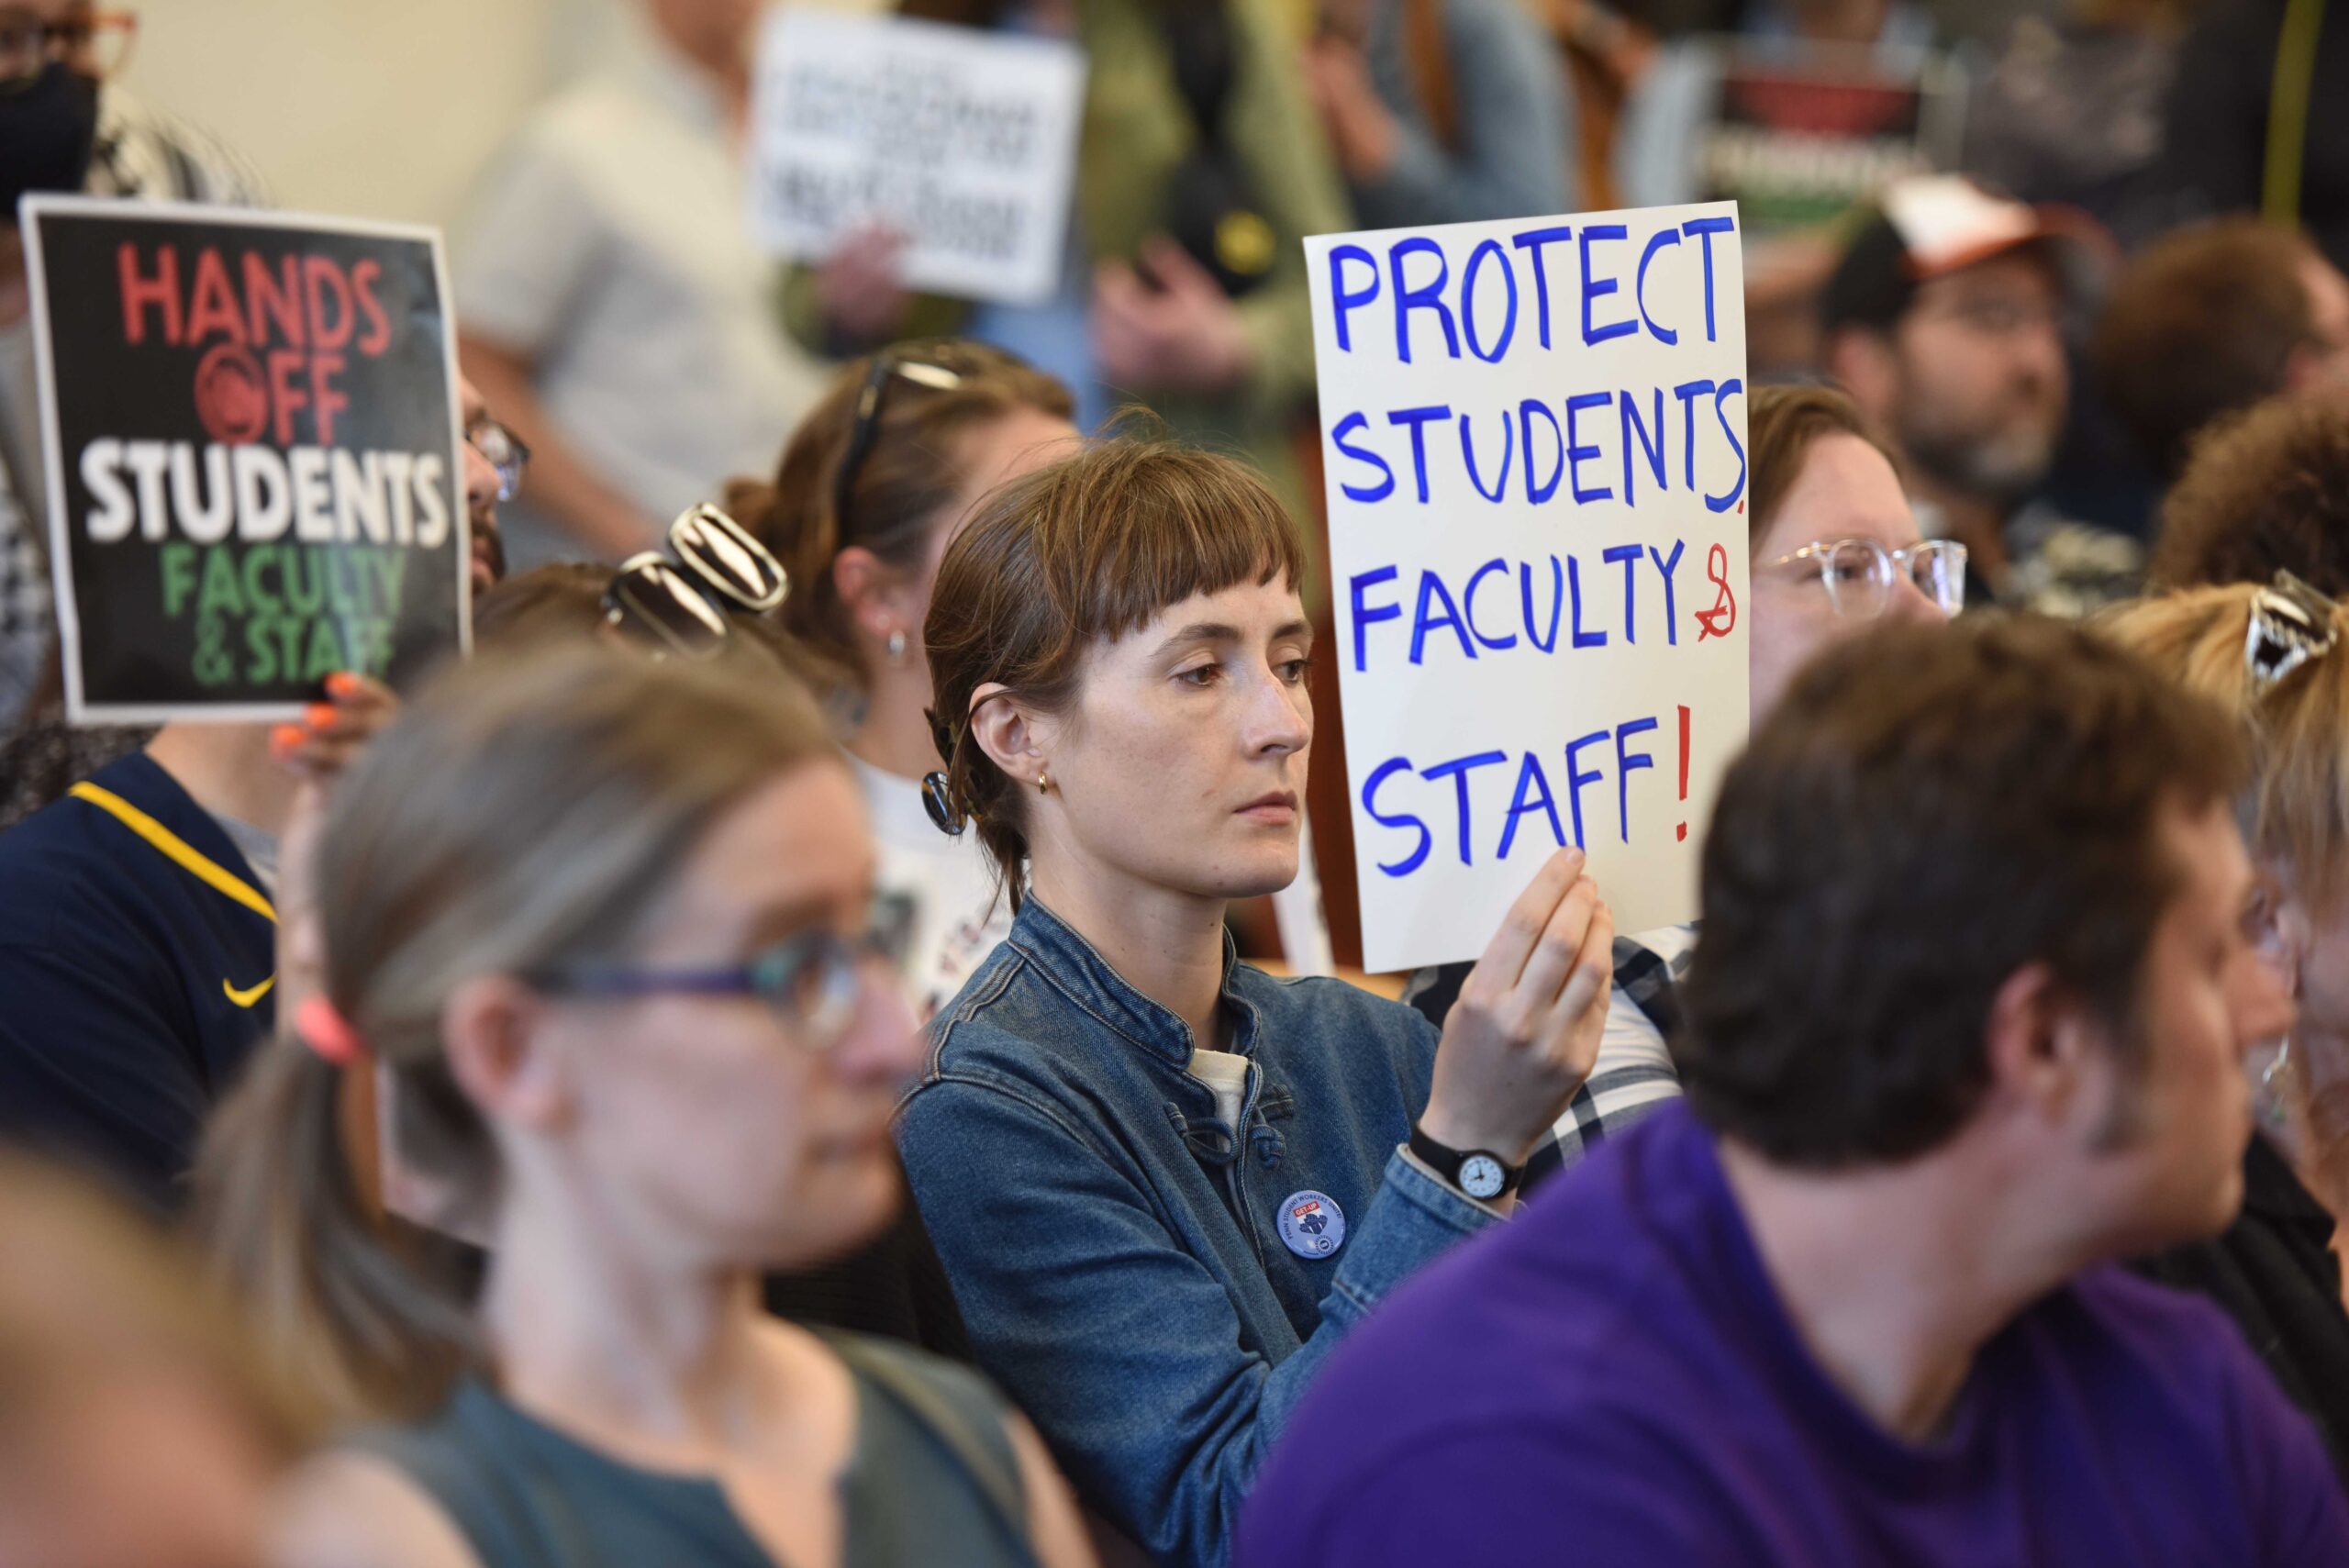 A person in a denim shirt holds a white sign that says "Protects students faculty & staff!" in blue letters.